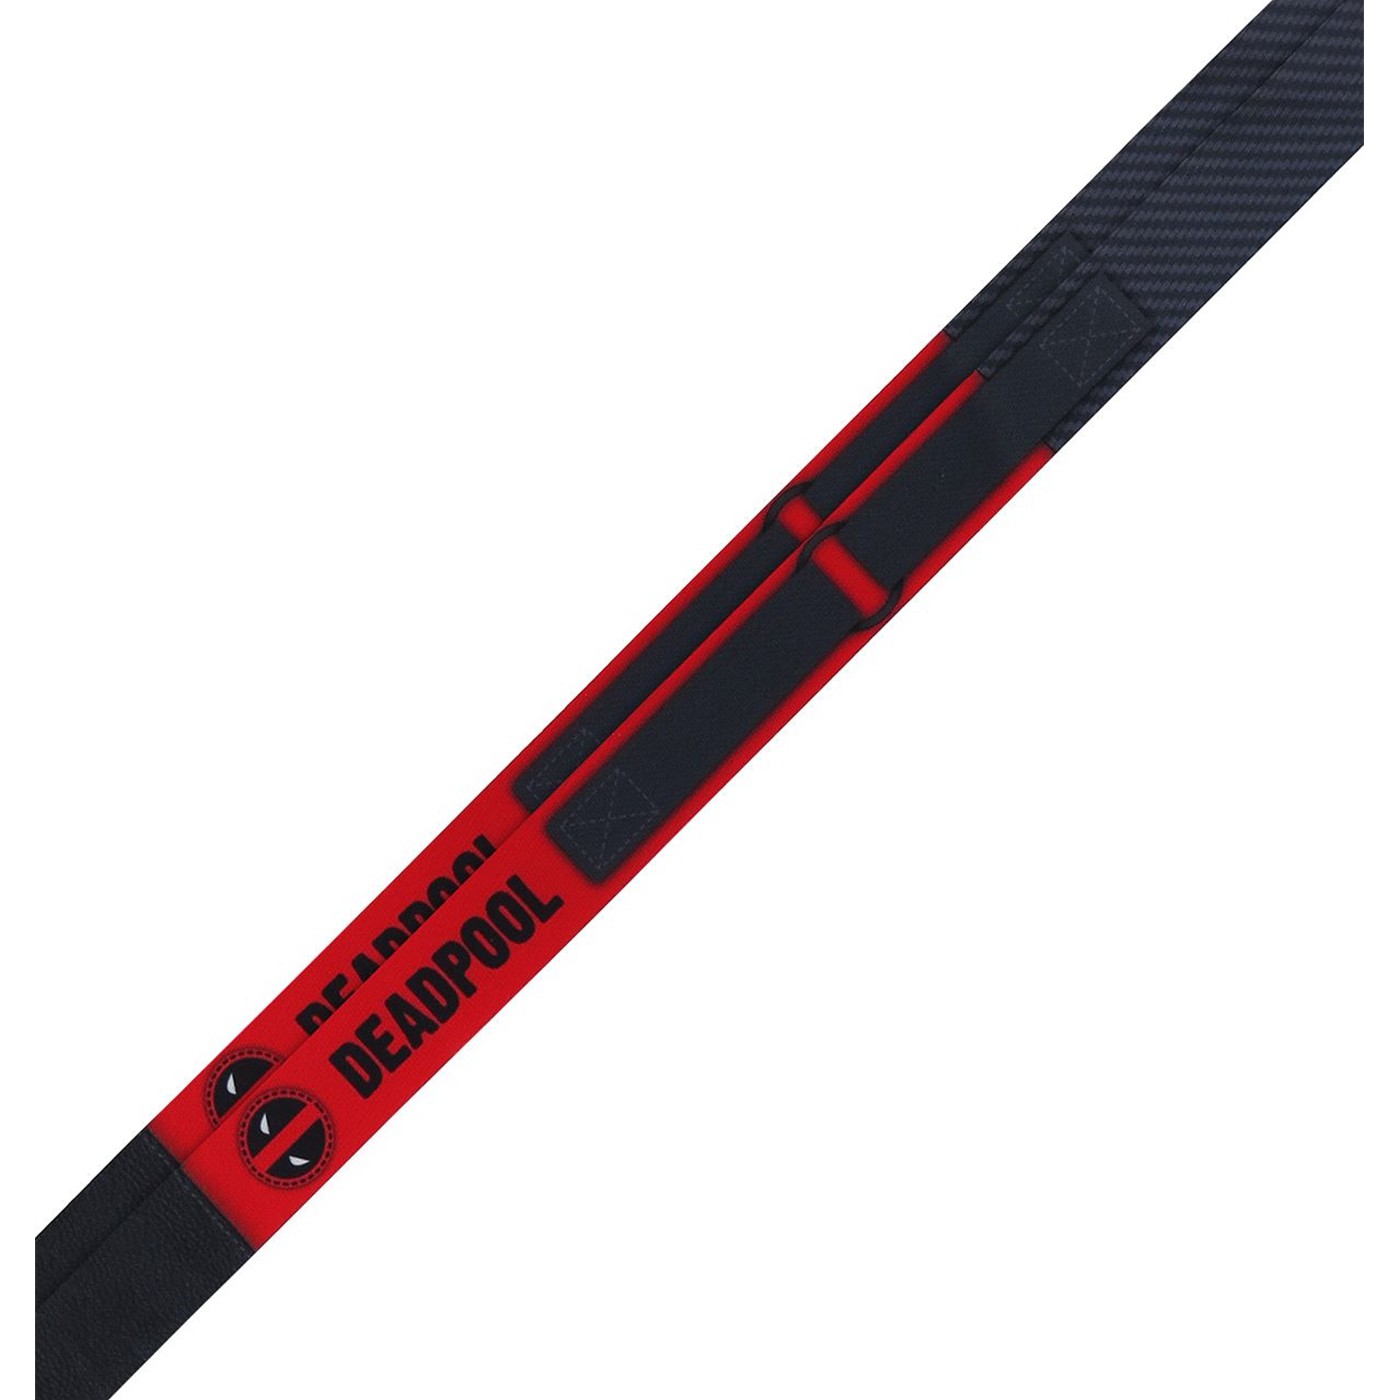 Deadpool Suit Up Lanyard with Metal Charm